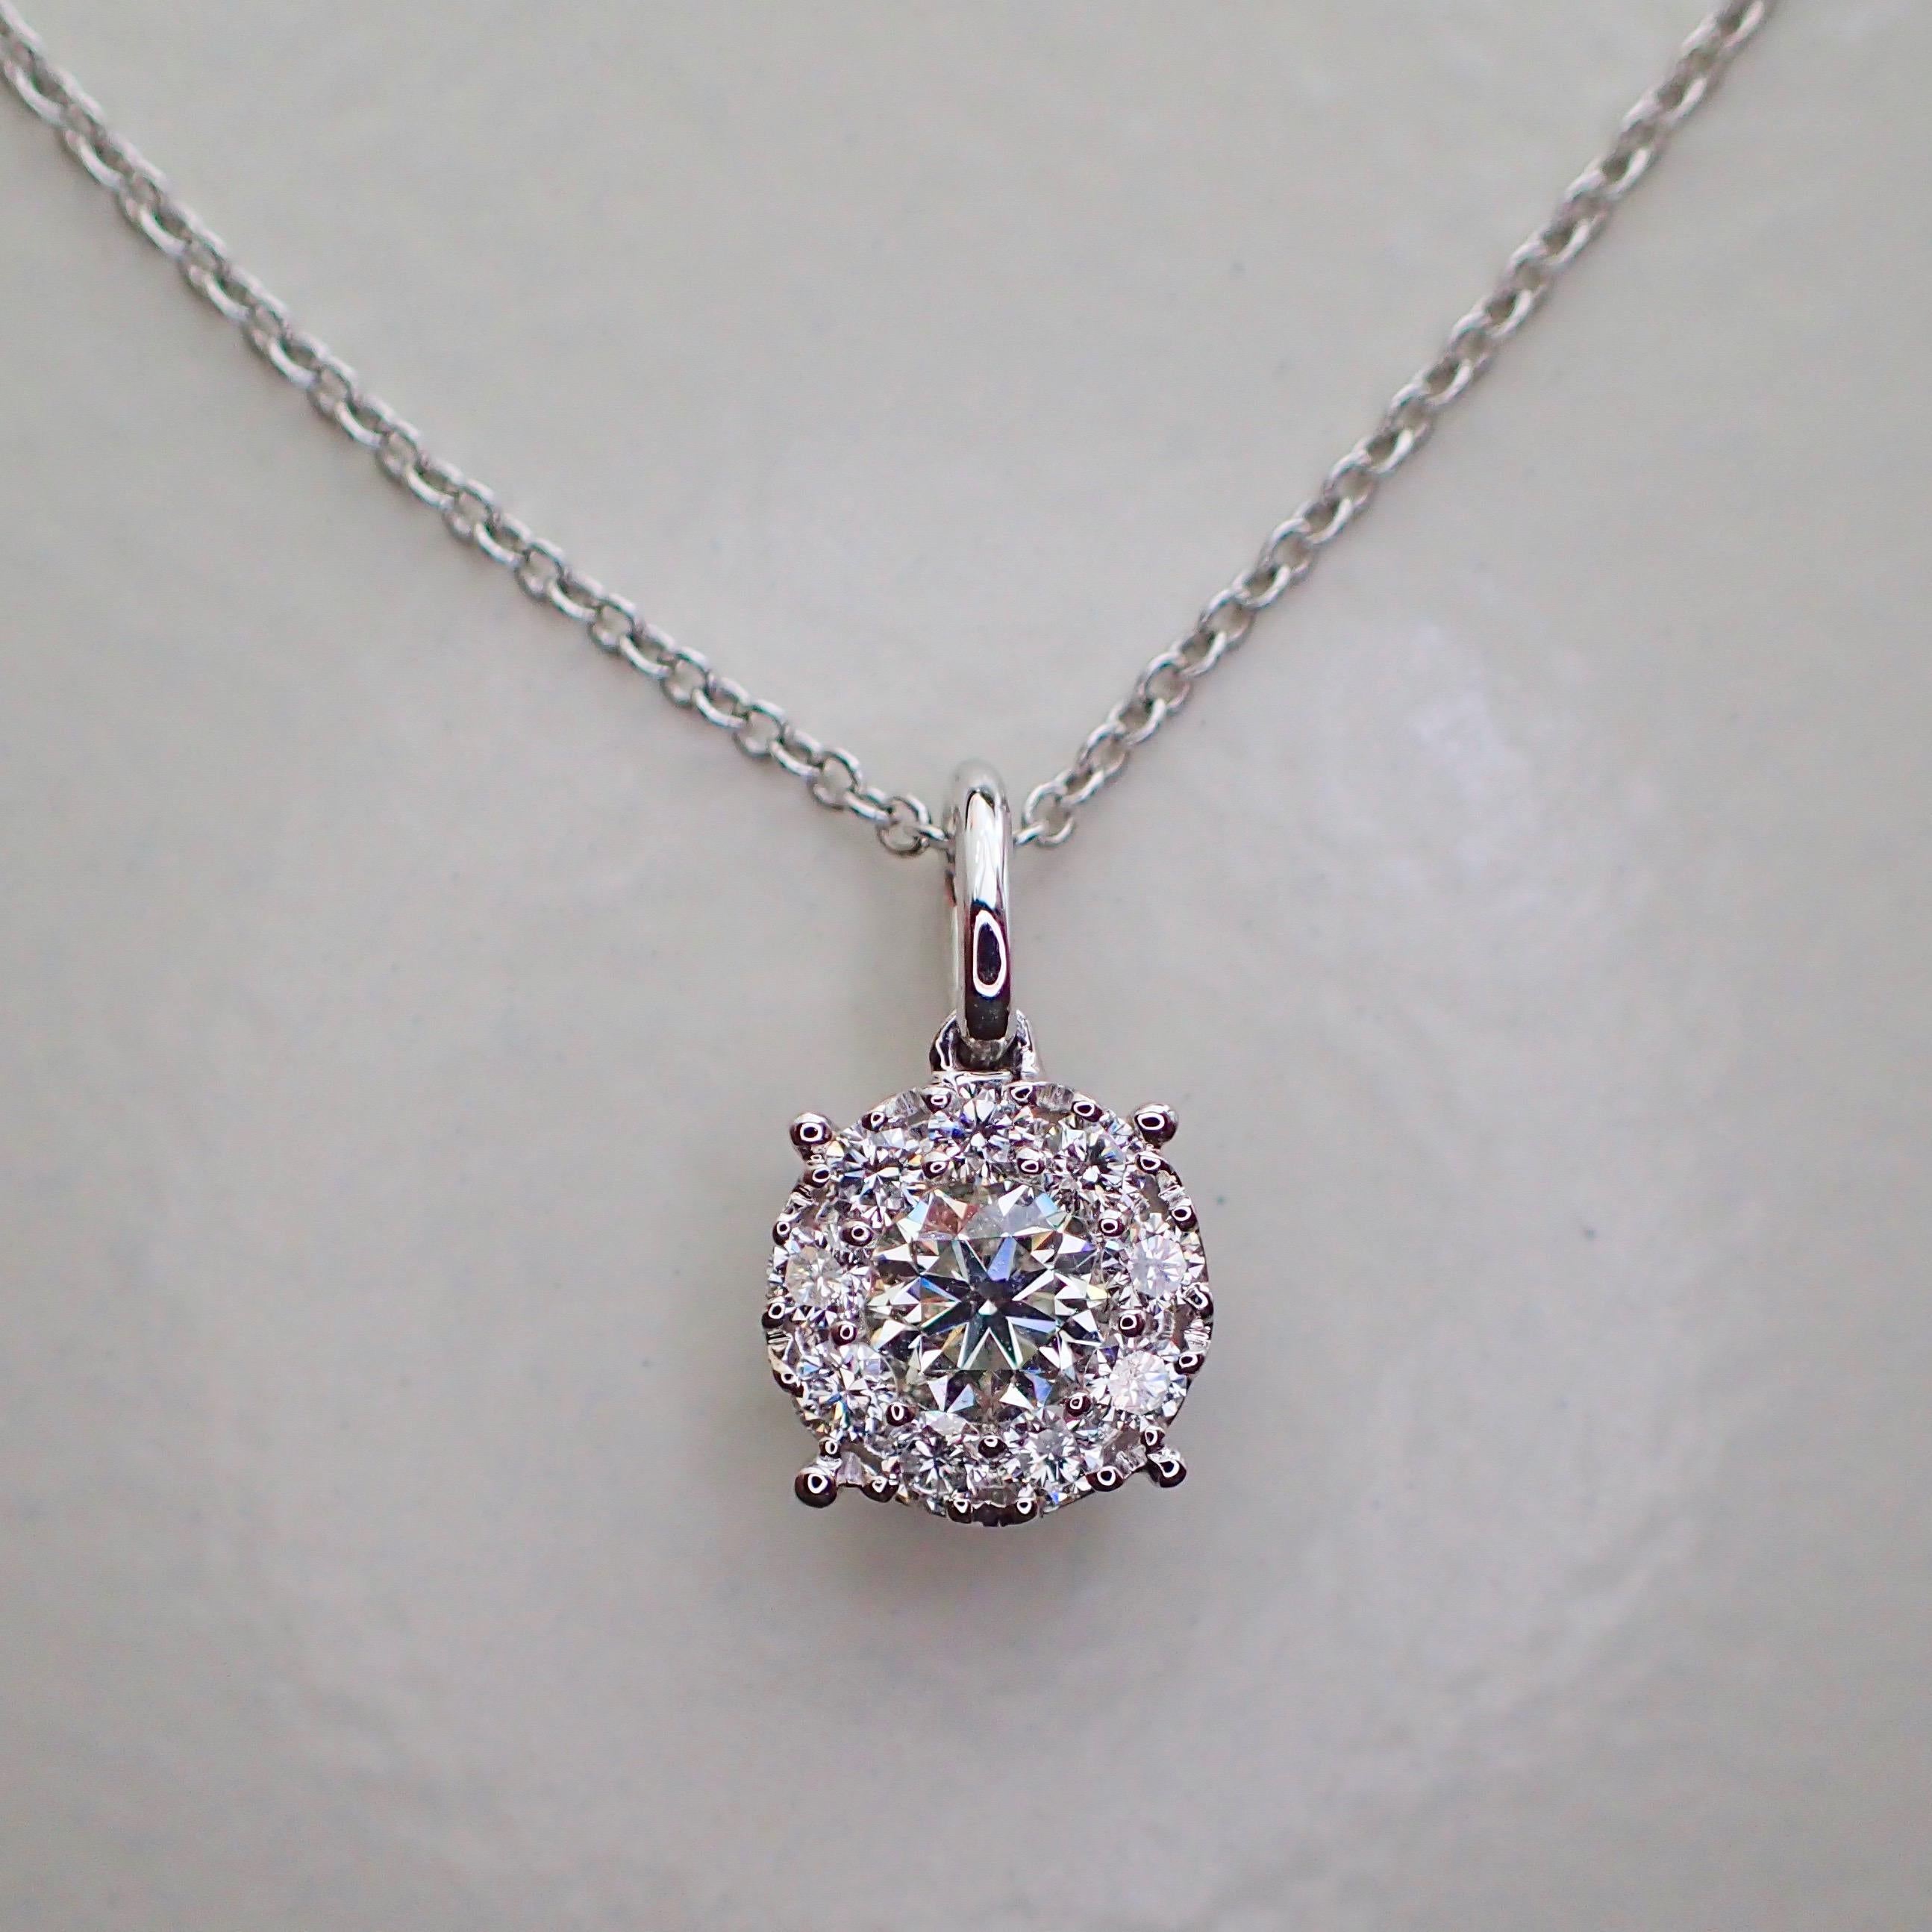 Contemporary 18 Karat White Gold Pendant with 0.46 Carat of Diamond Hangs from a Chain For Sale